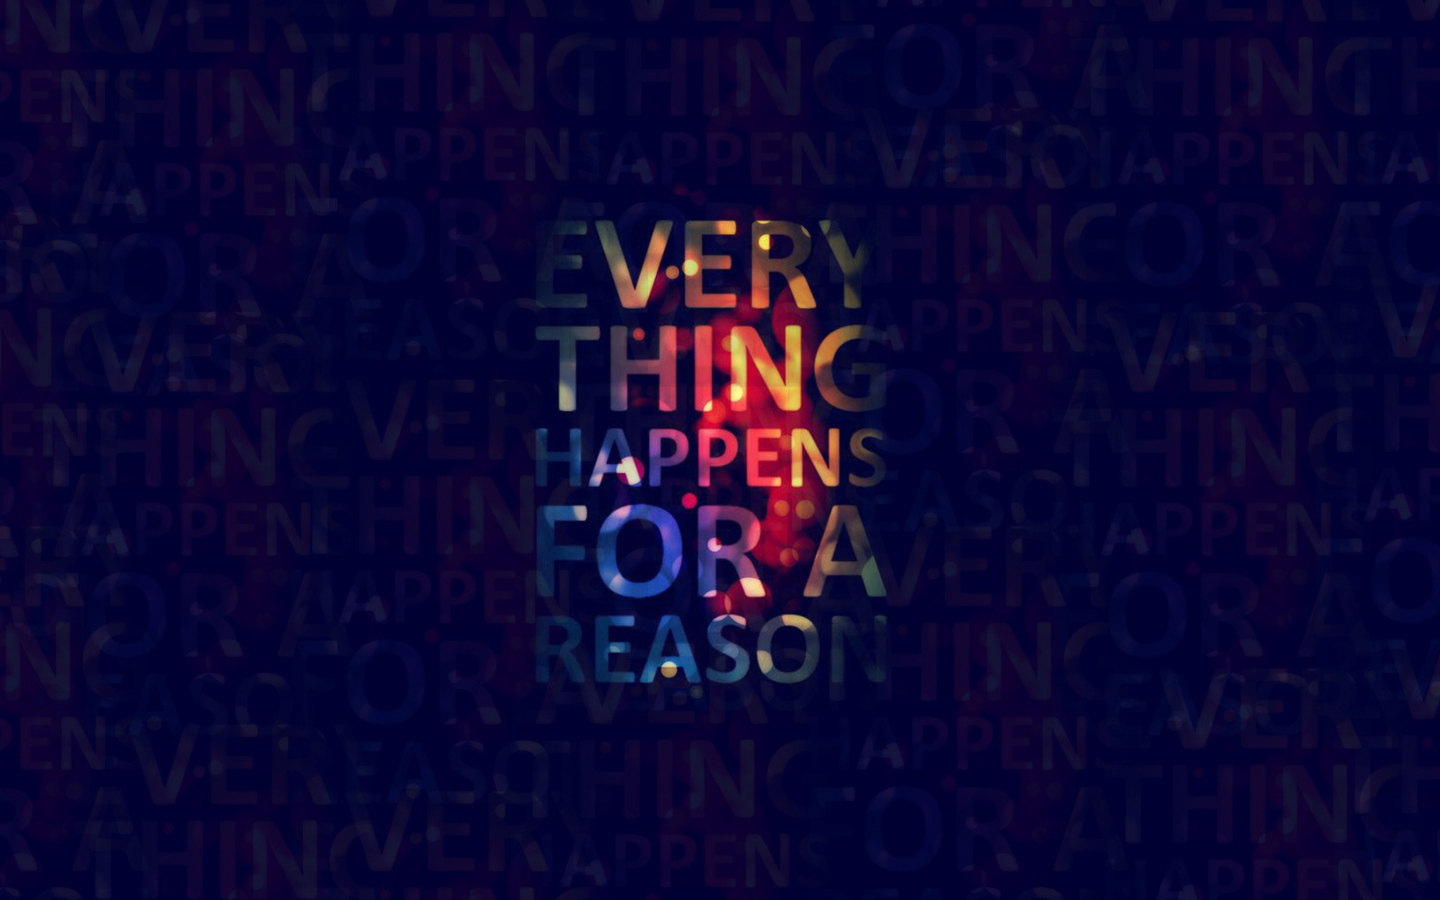 Everything Happens For A Reason wallpaper 1440x900